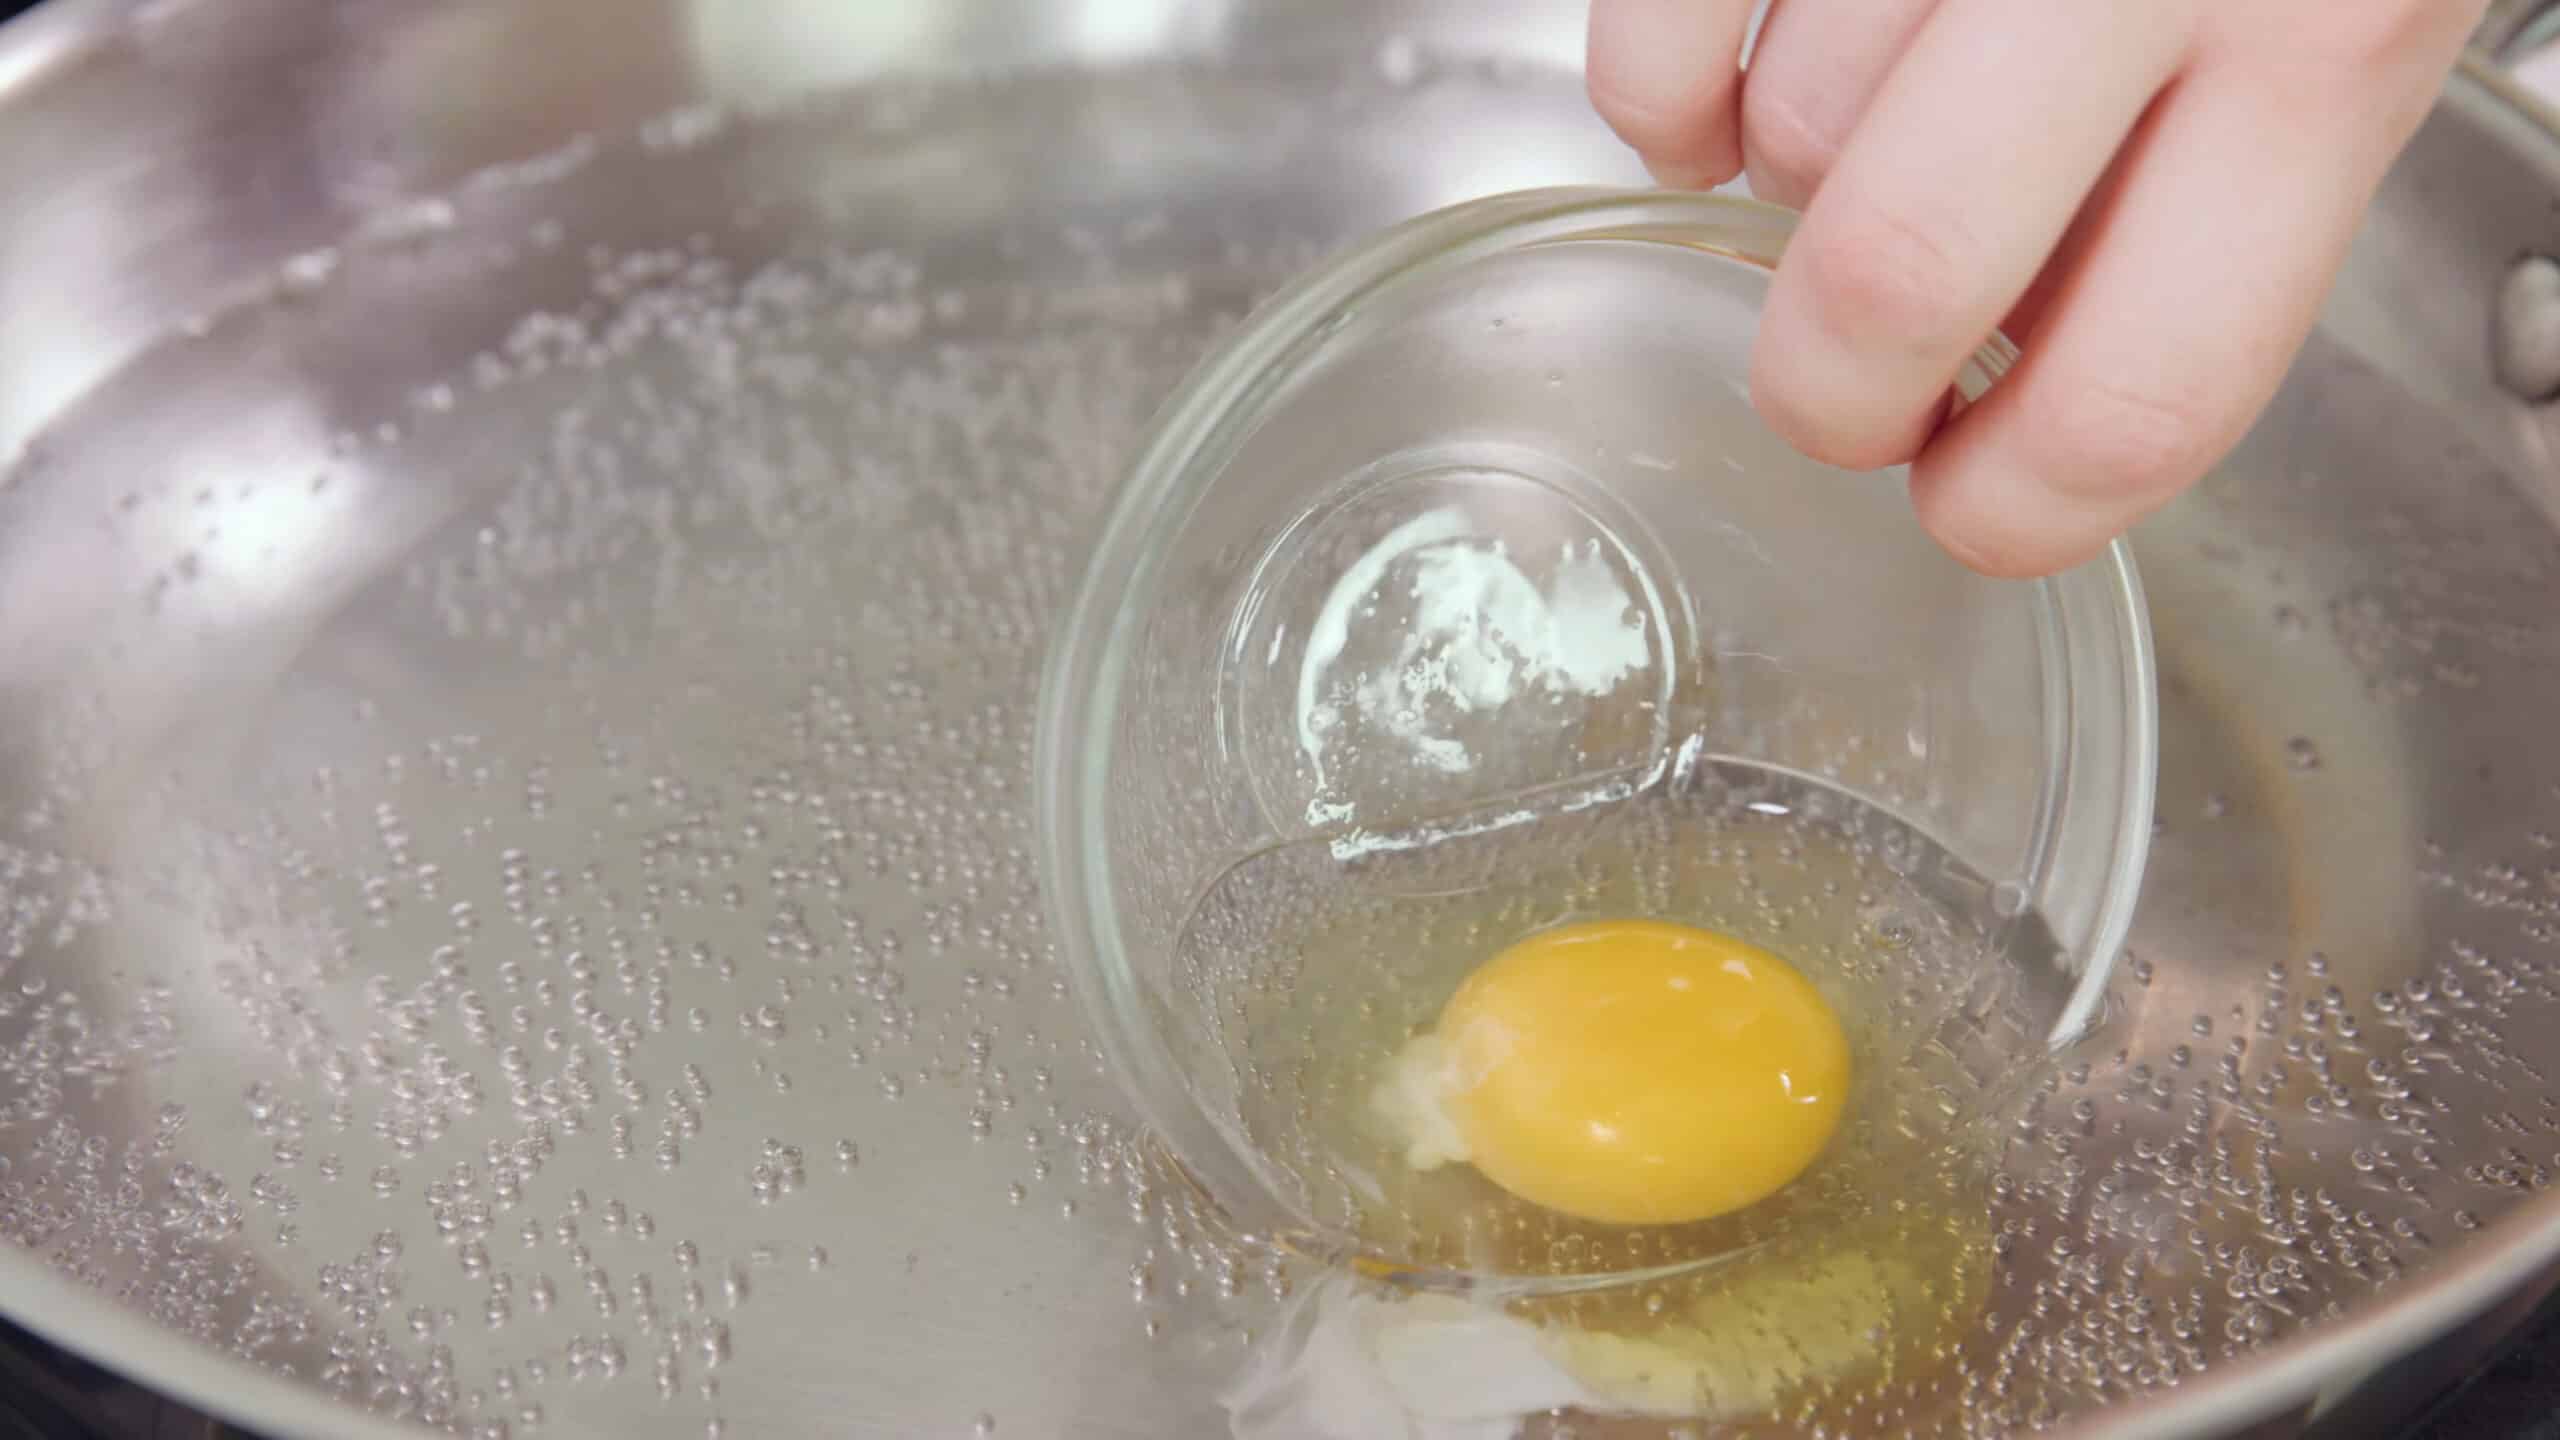 Close-up view of silver saucepan with heated water and a individual egg added to water by tipping small dish.